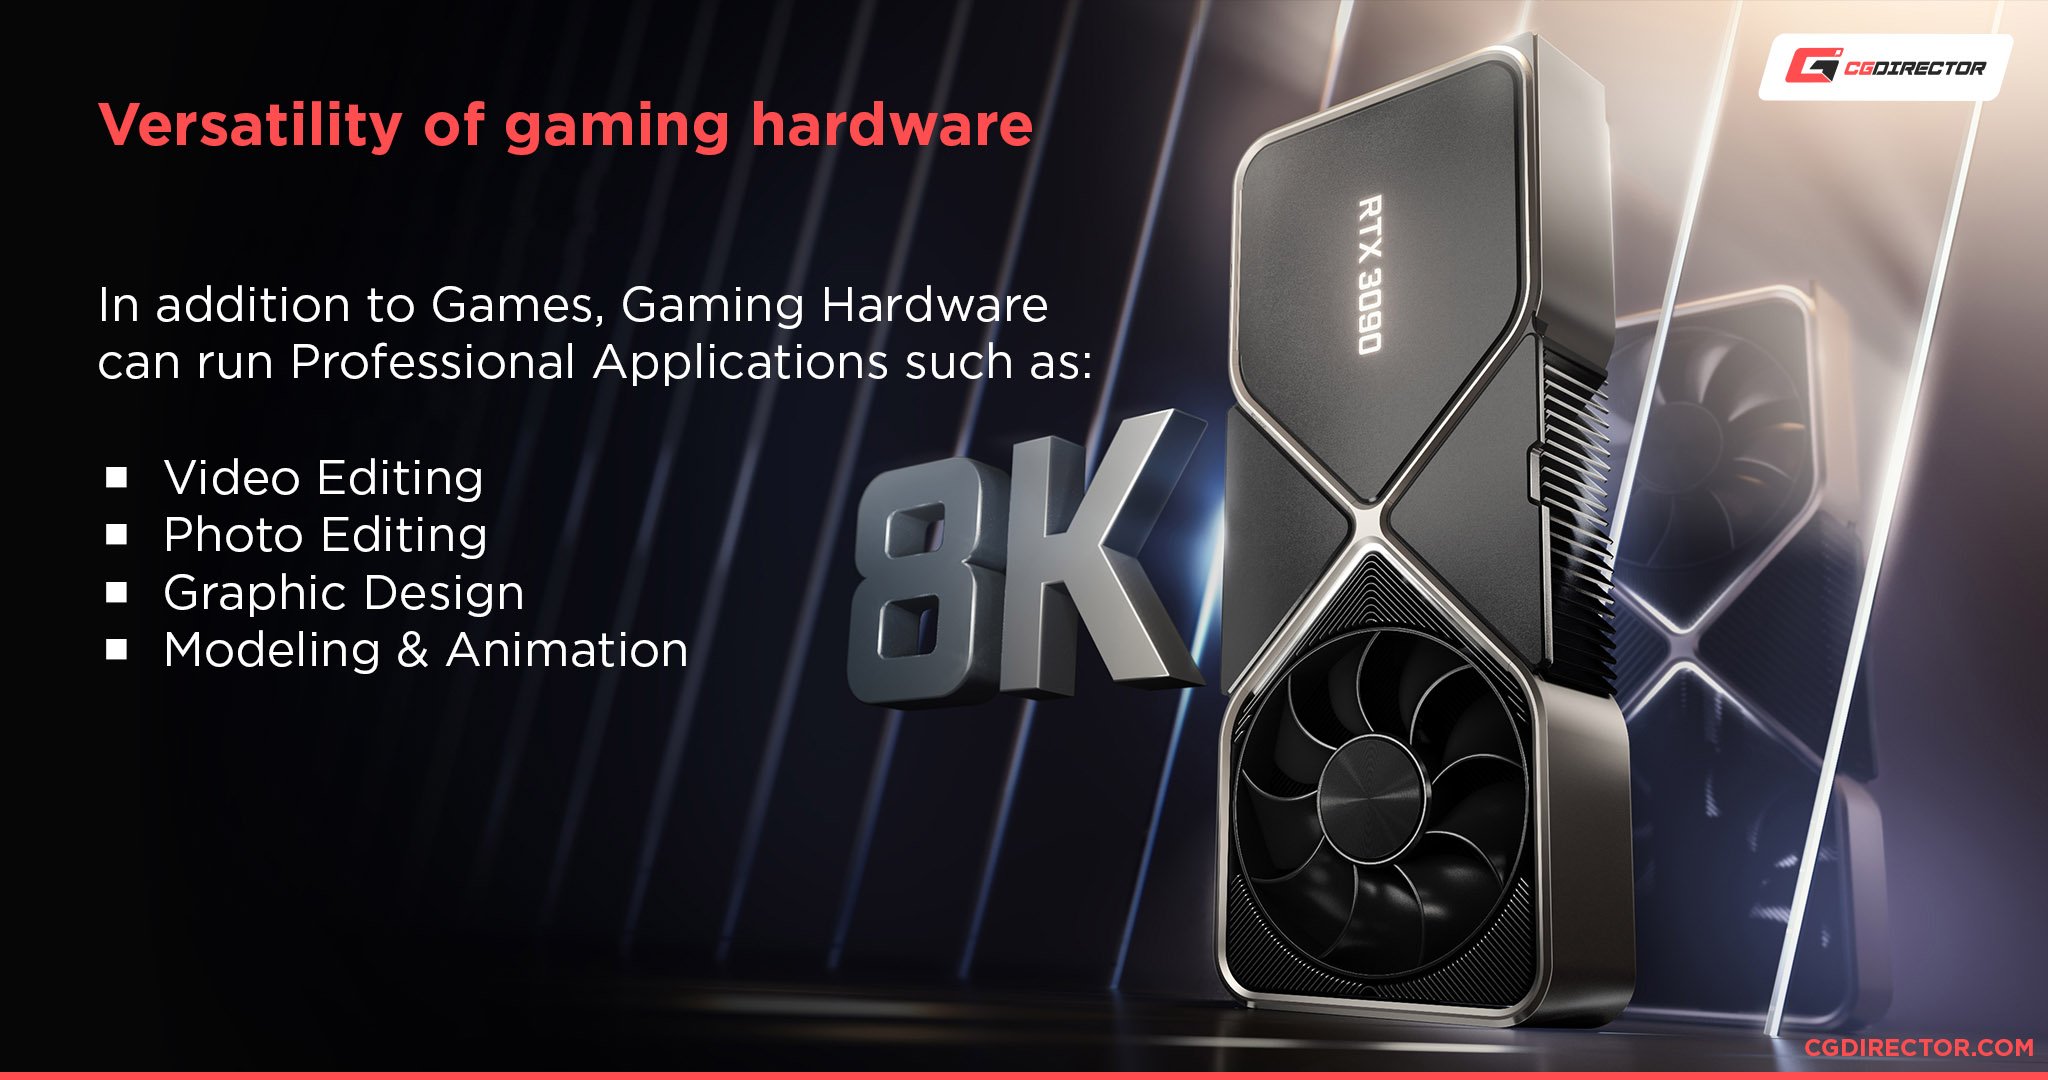 Gaming Hardware can be used for Professional Workloads as well